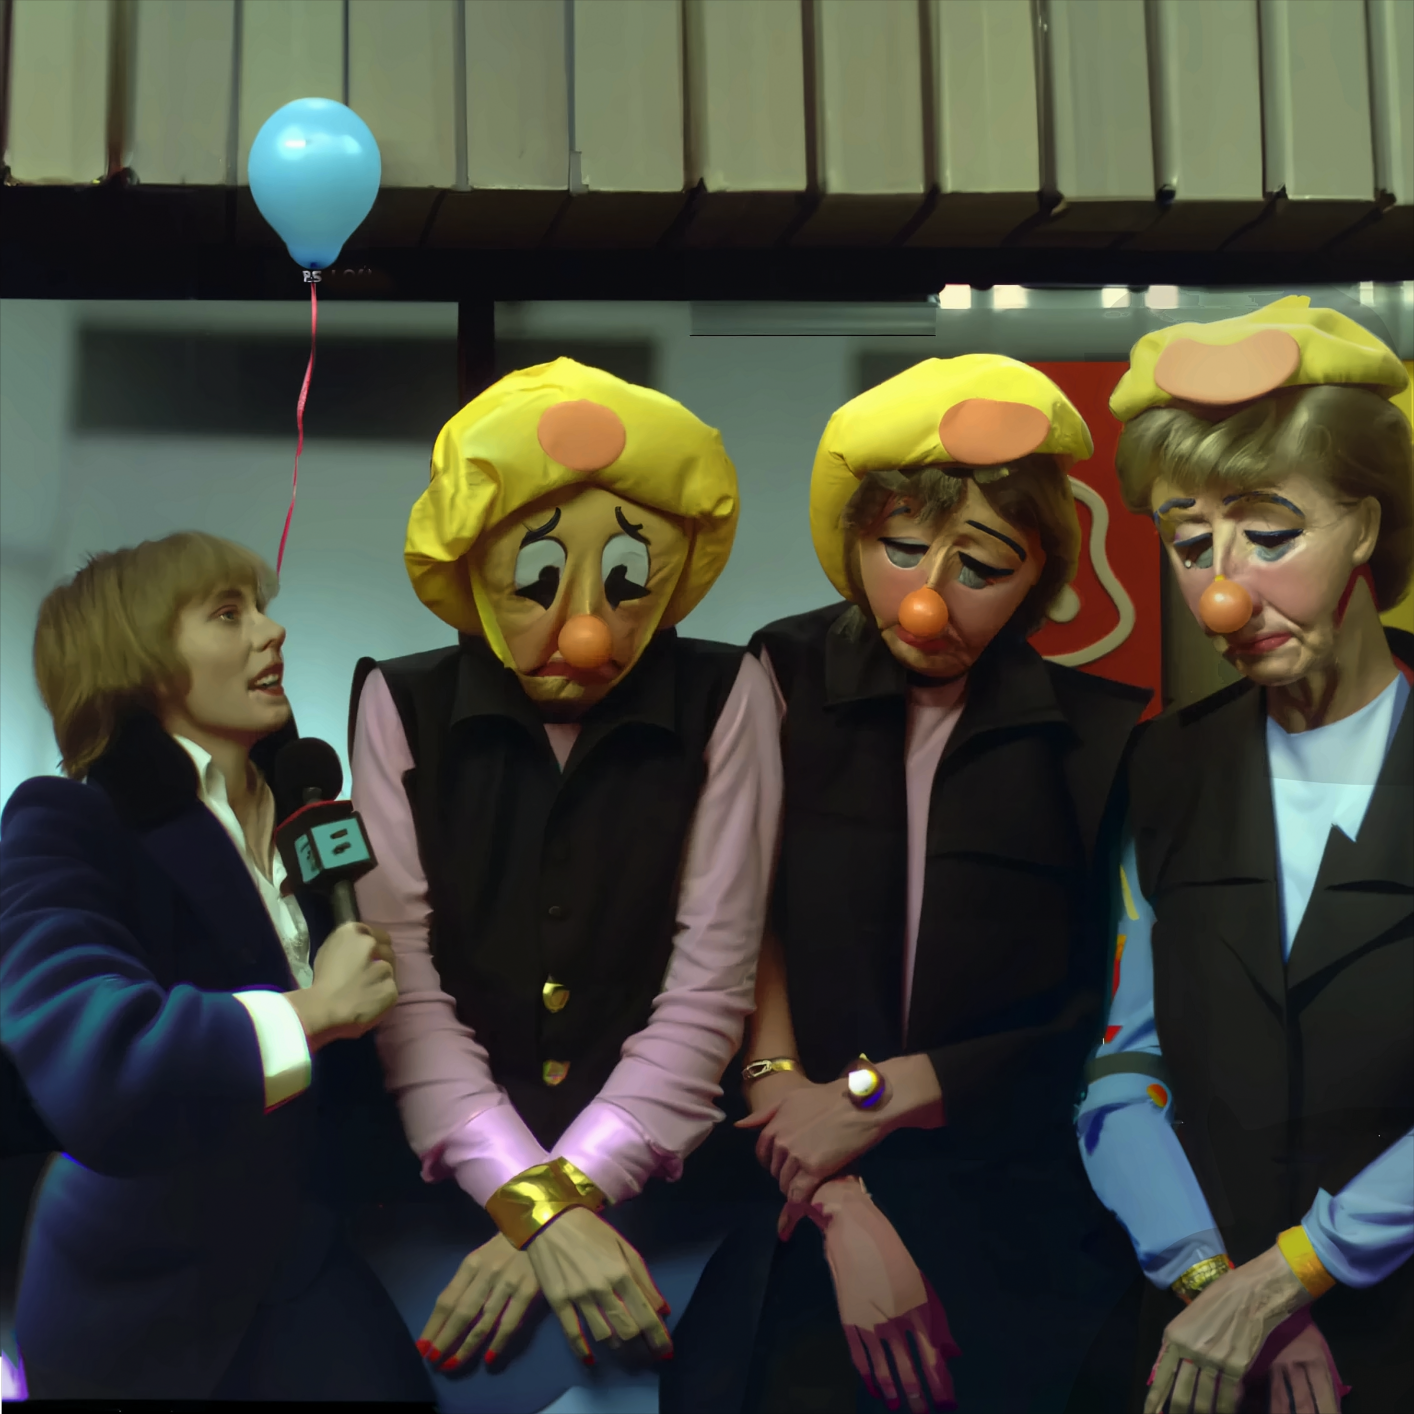 Three sad clowns being interviewed by a news reporter with a small blue balloon